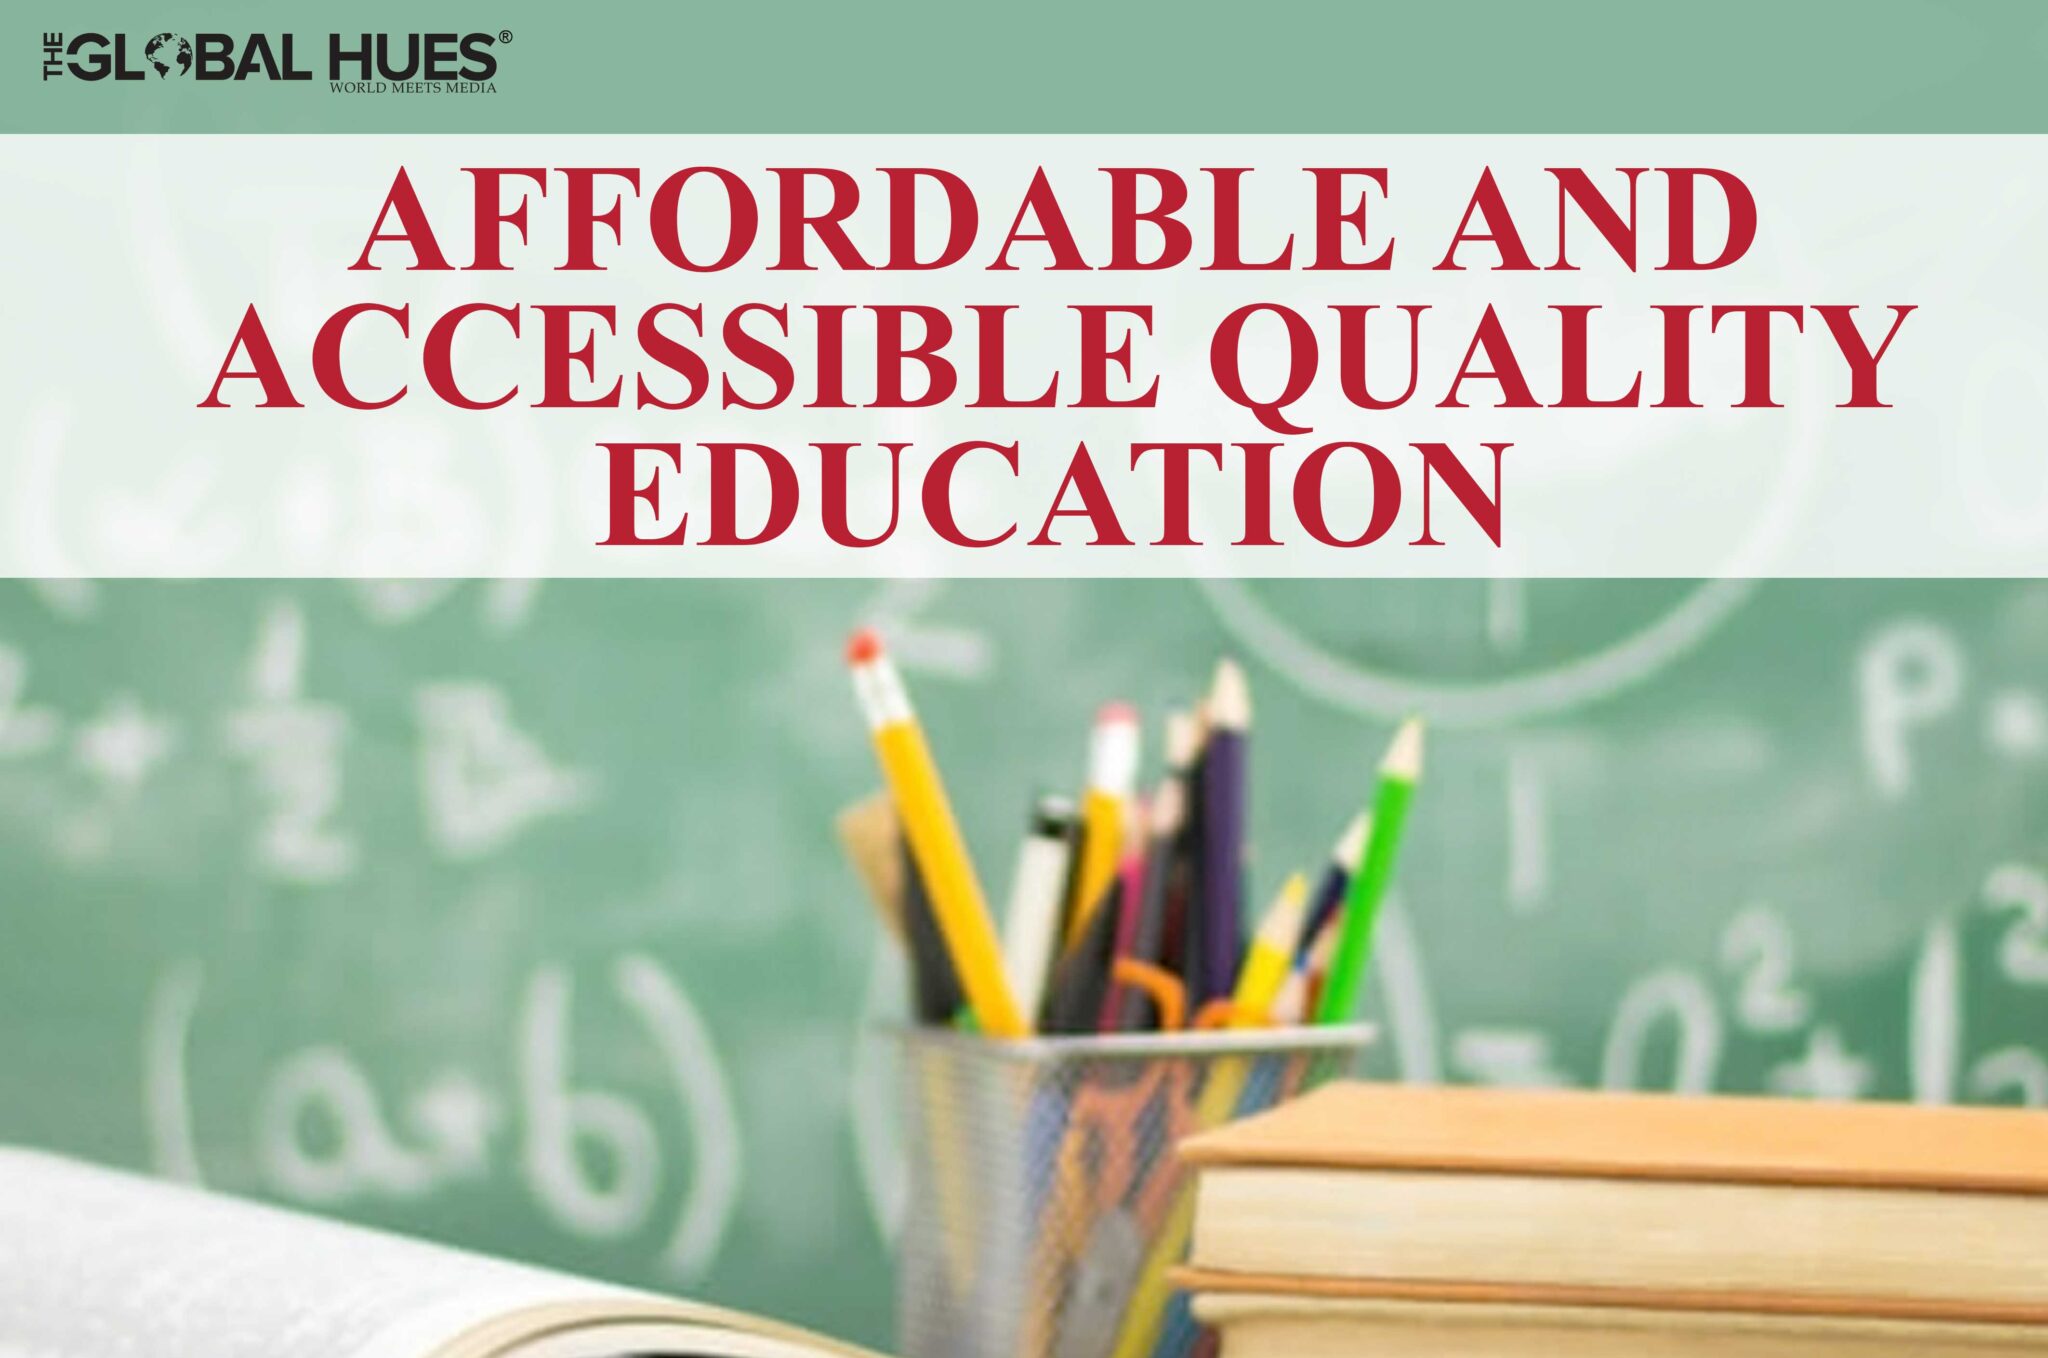 Affordable and Accessible Quality Education | The Global Hues